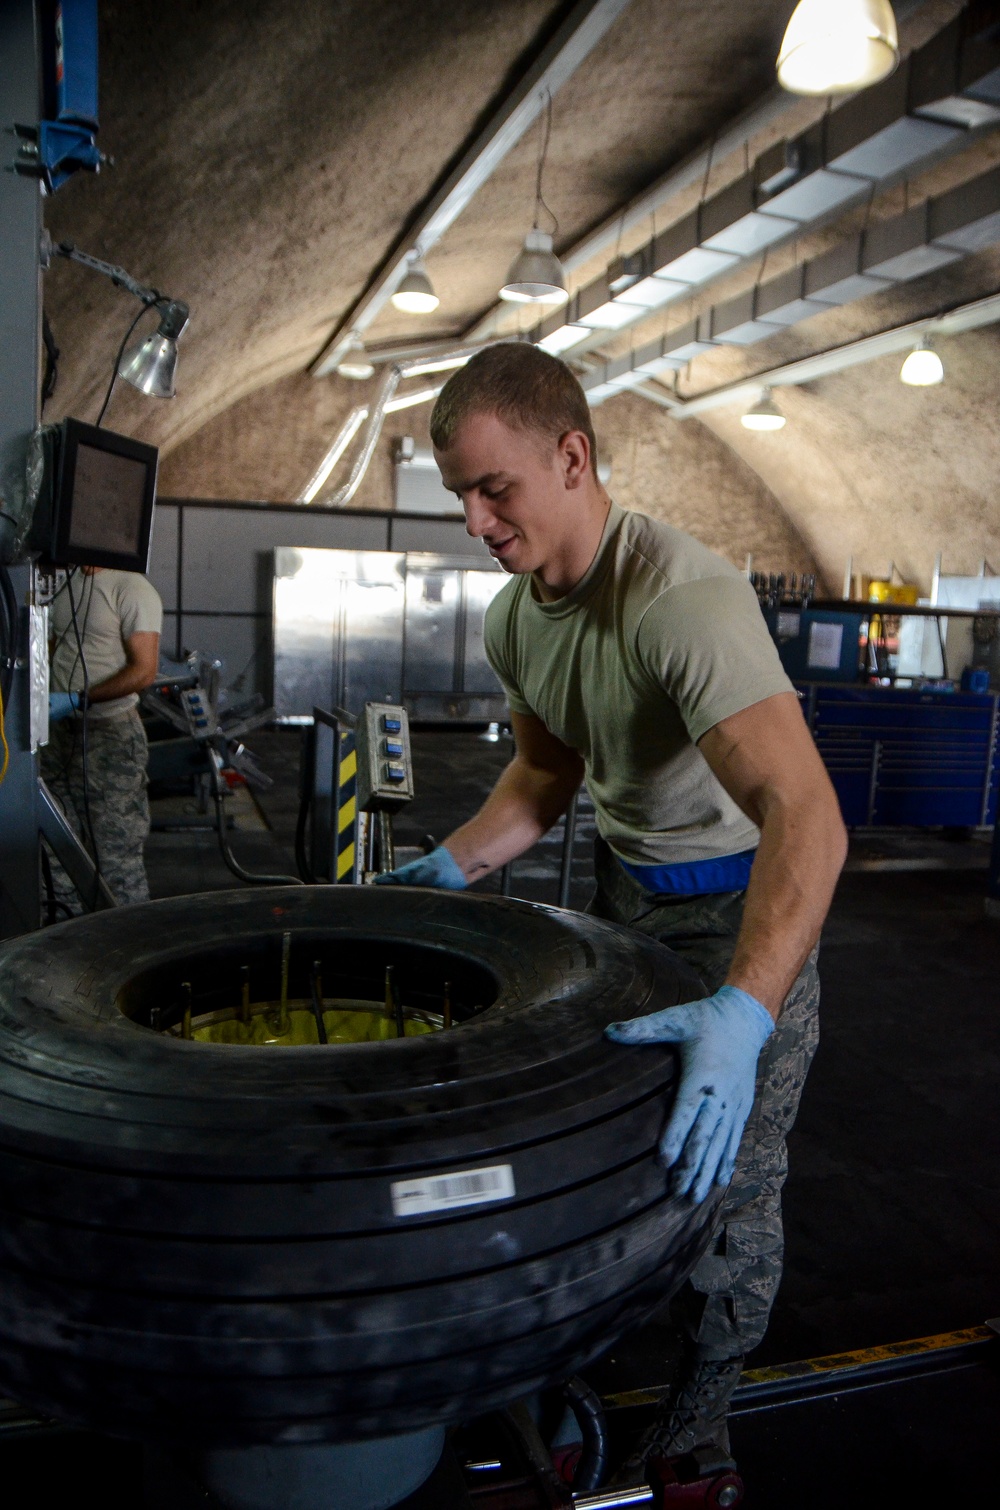 Day on the job: Tire, wheel shop